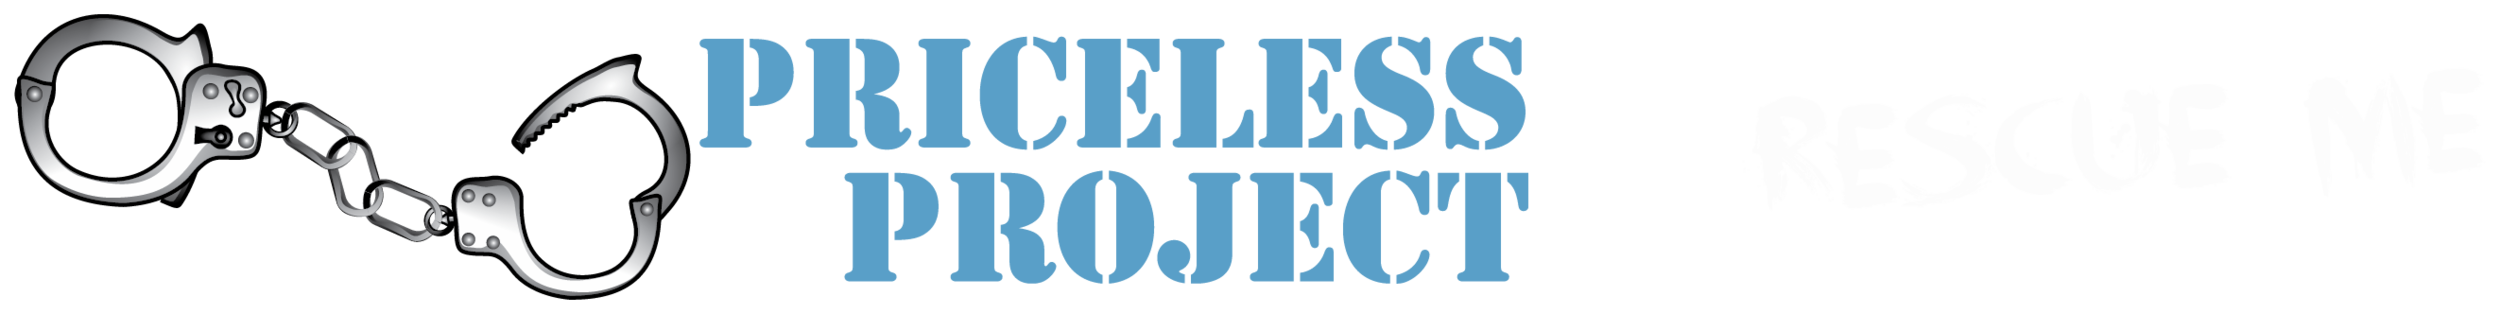 priceless-project-logo-1.png